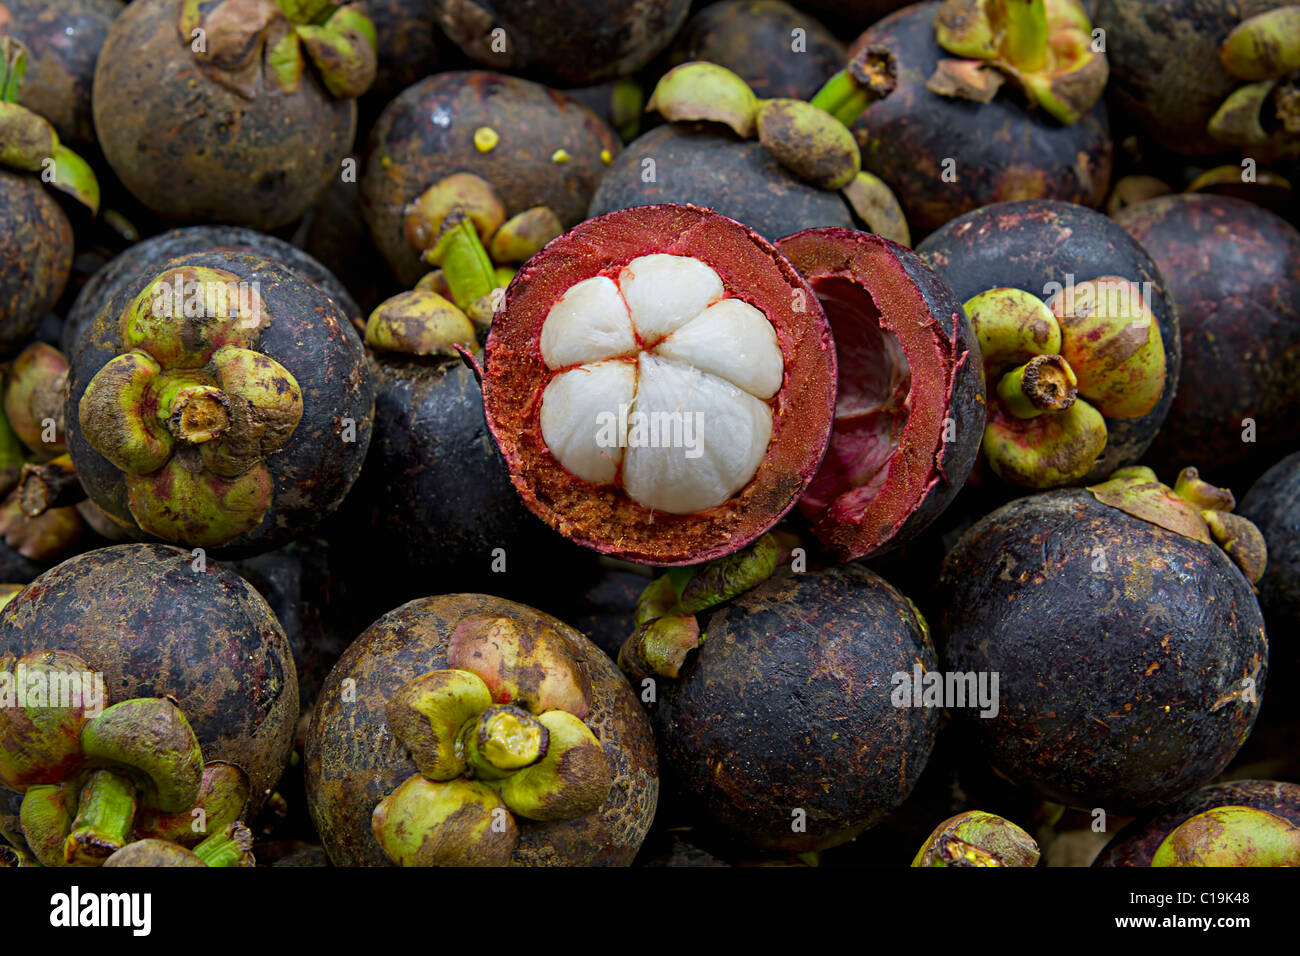 Purple Mangosteen on Fruit Stand in Tropical Country Stock Photo